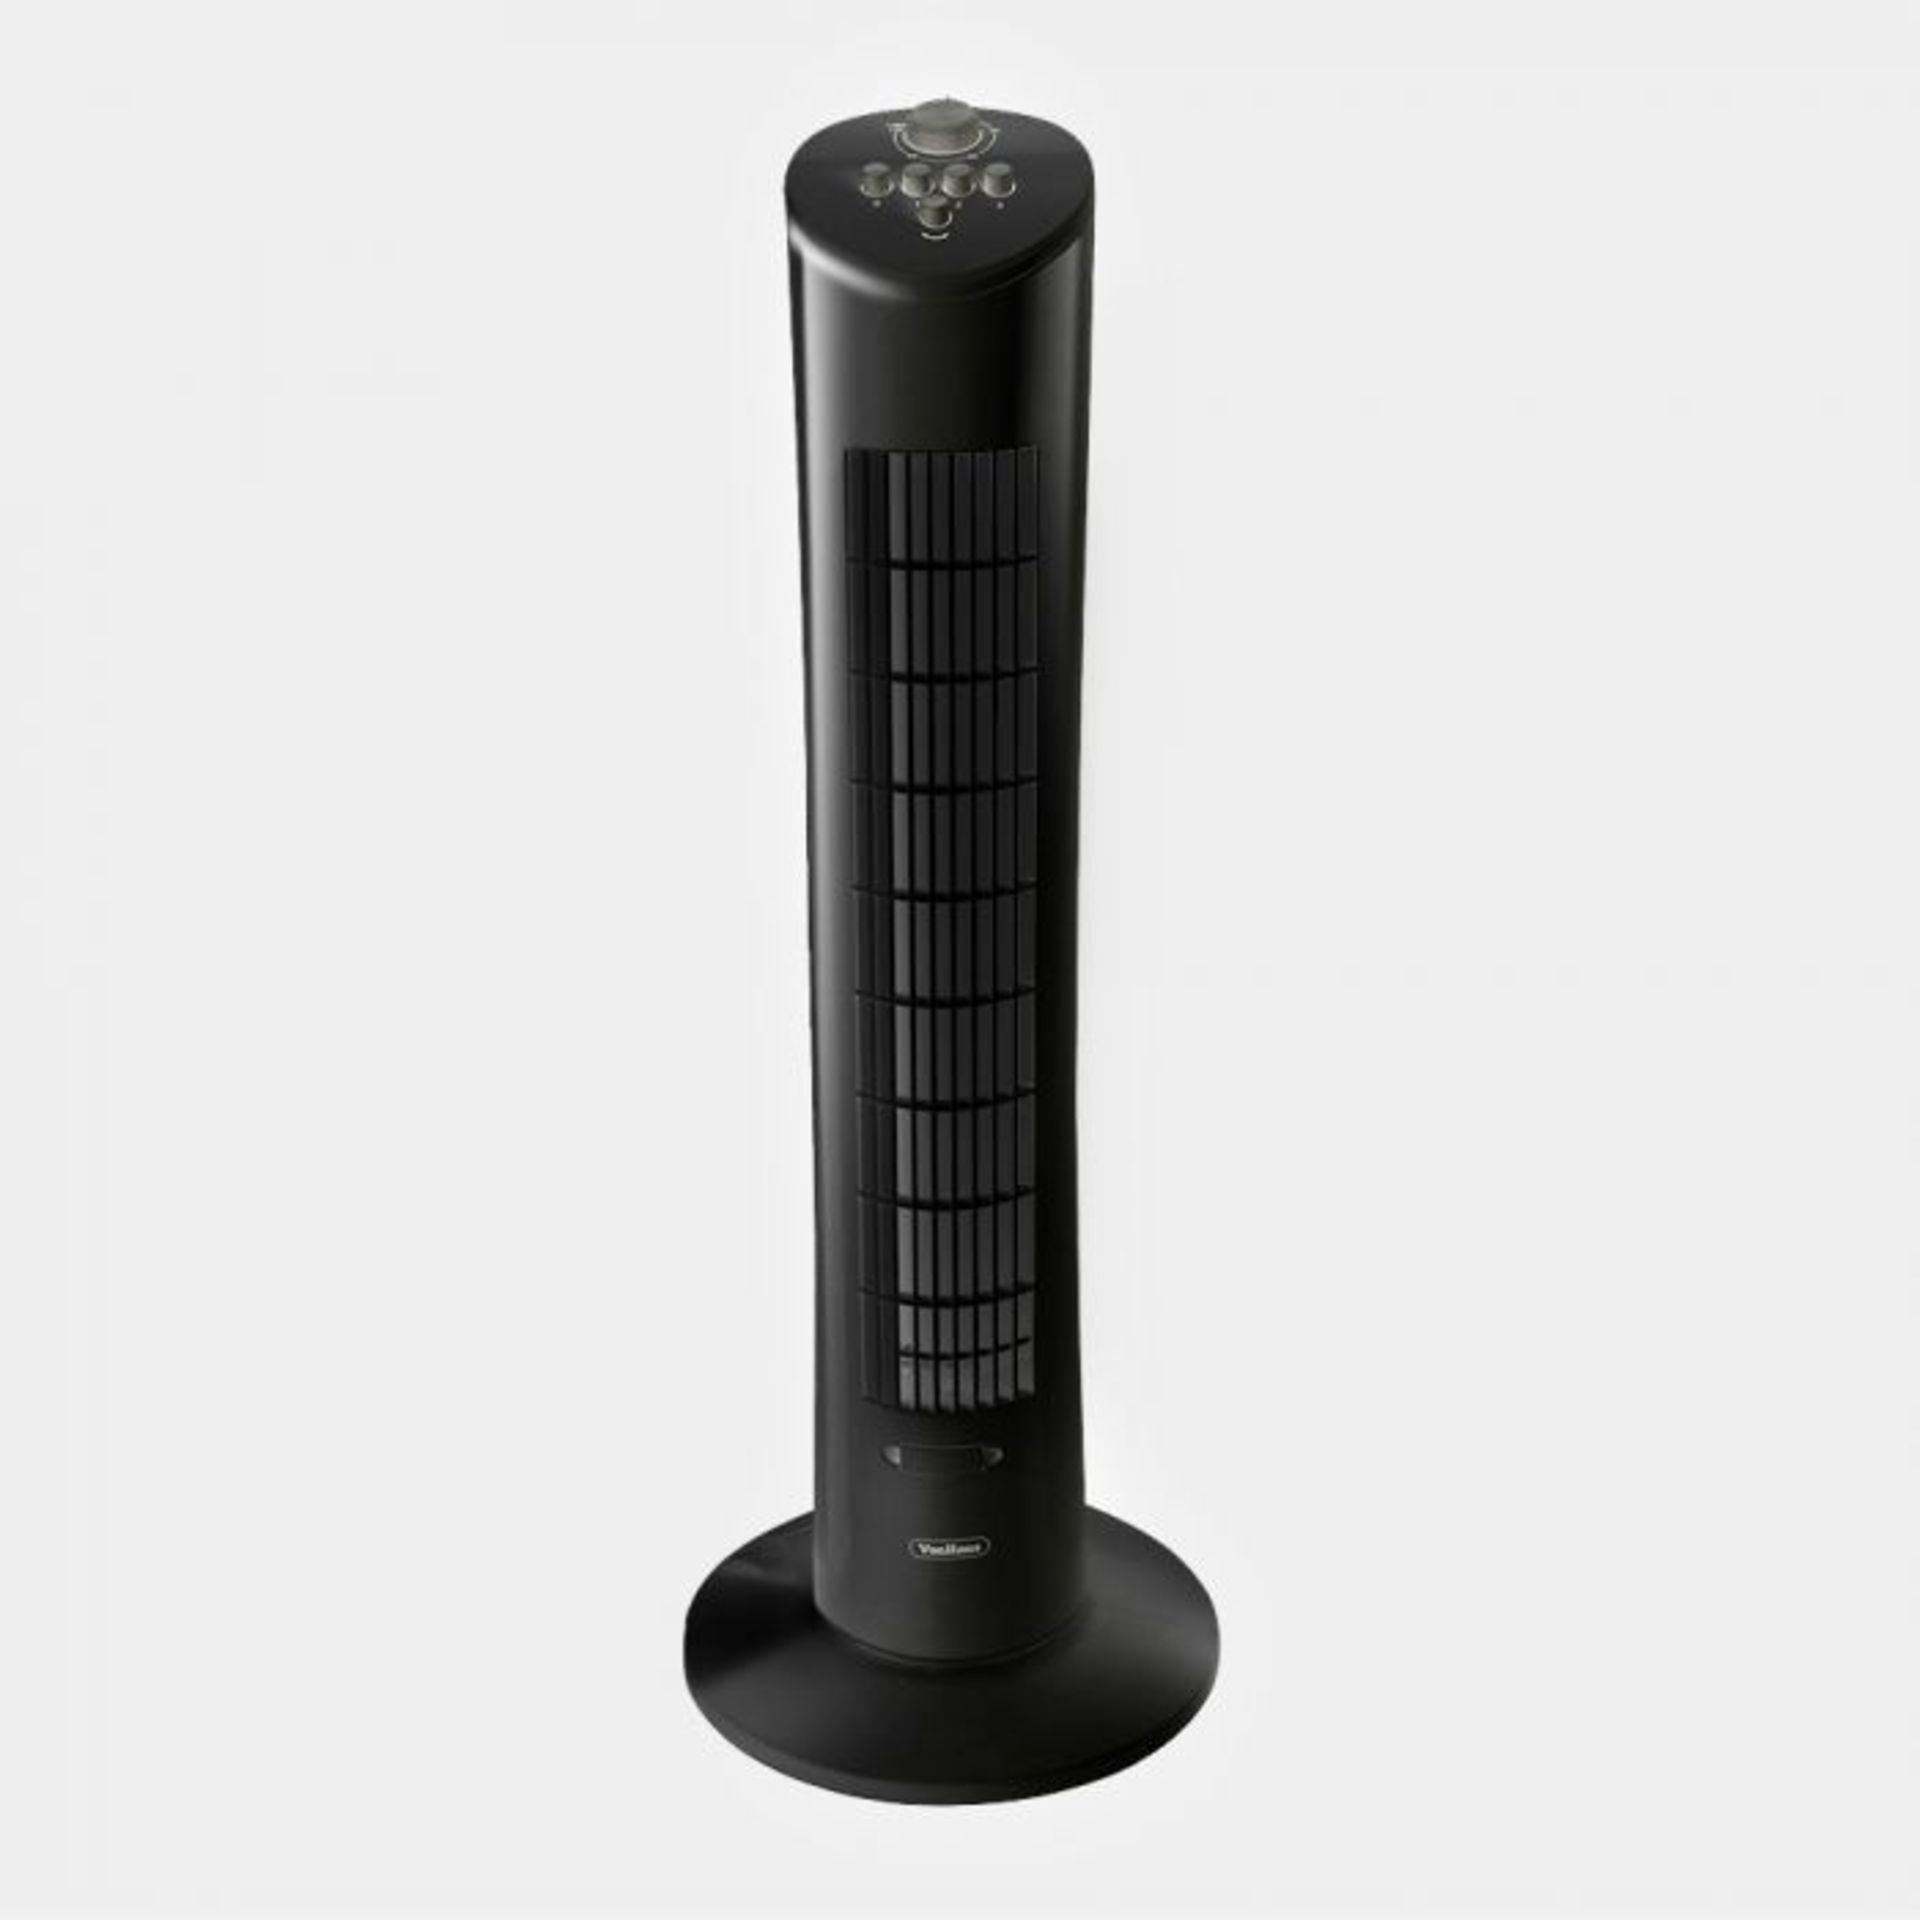 Portable 31" Tower Fan Black. When the heat is on, it can be difficult to keep your cool.